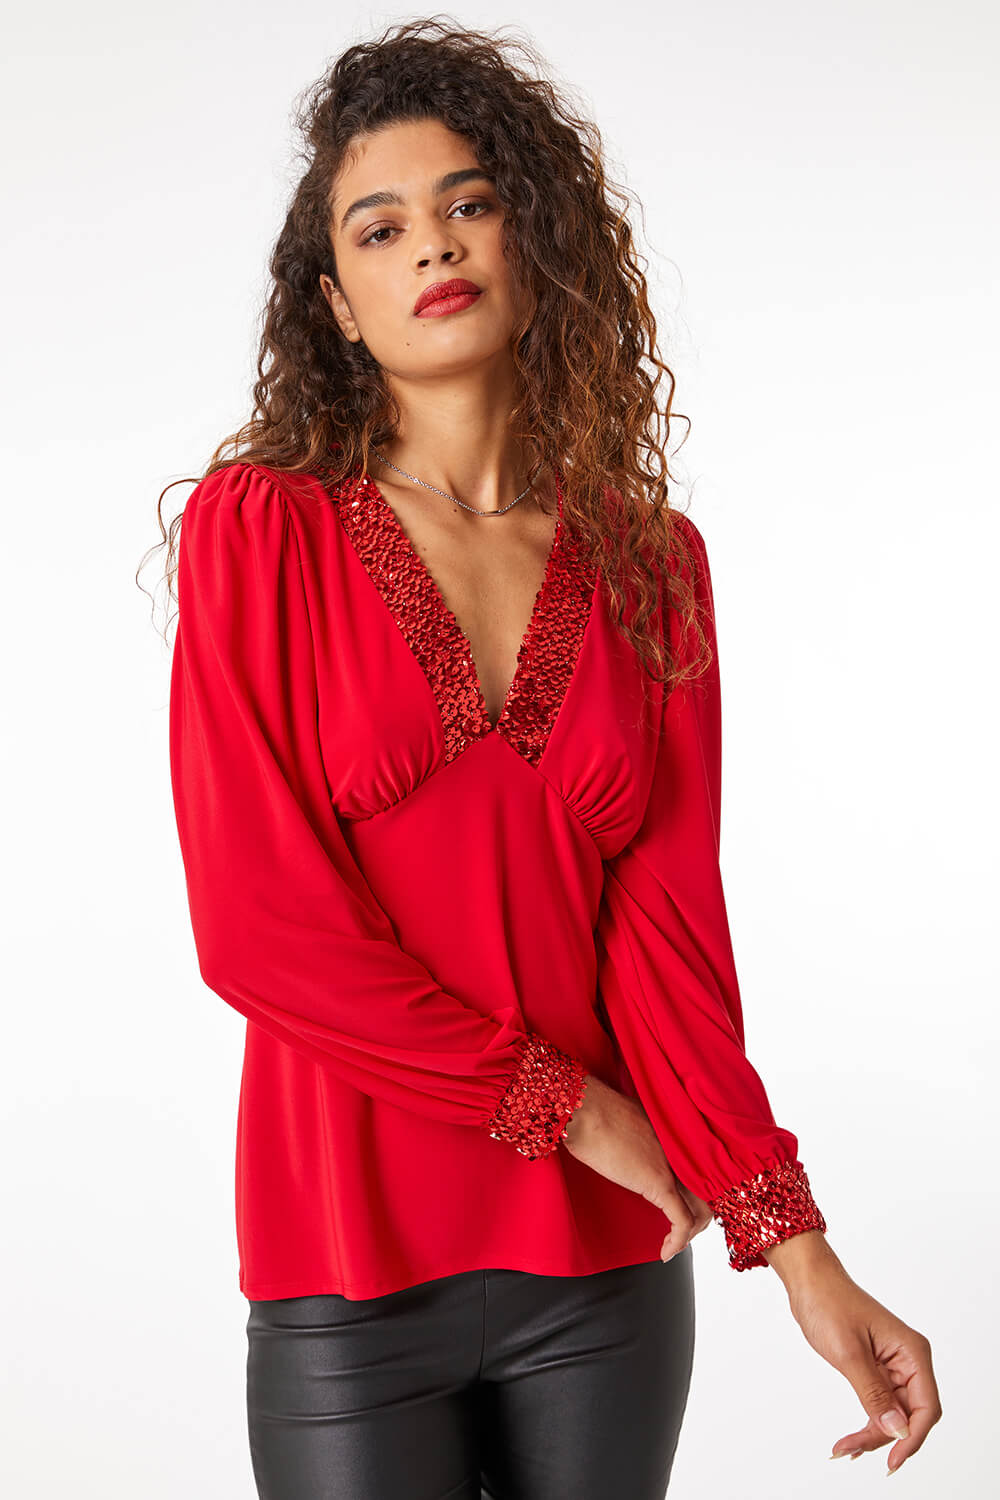 Red Sequin Trim Stretch Top, Image 1 of 5